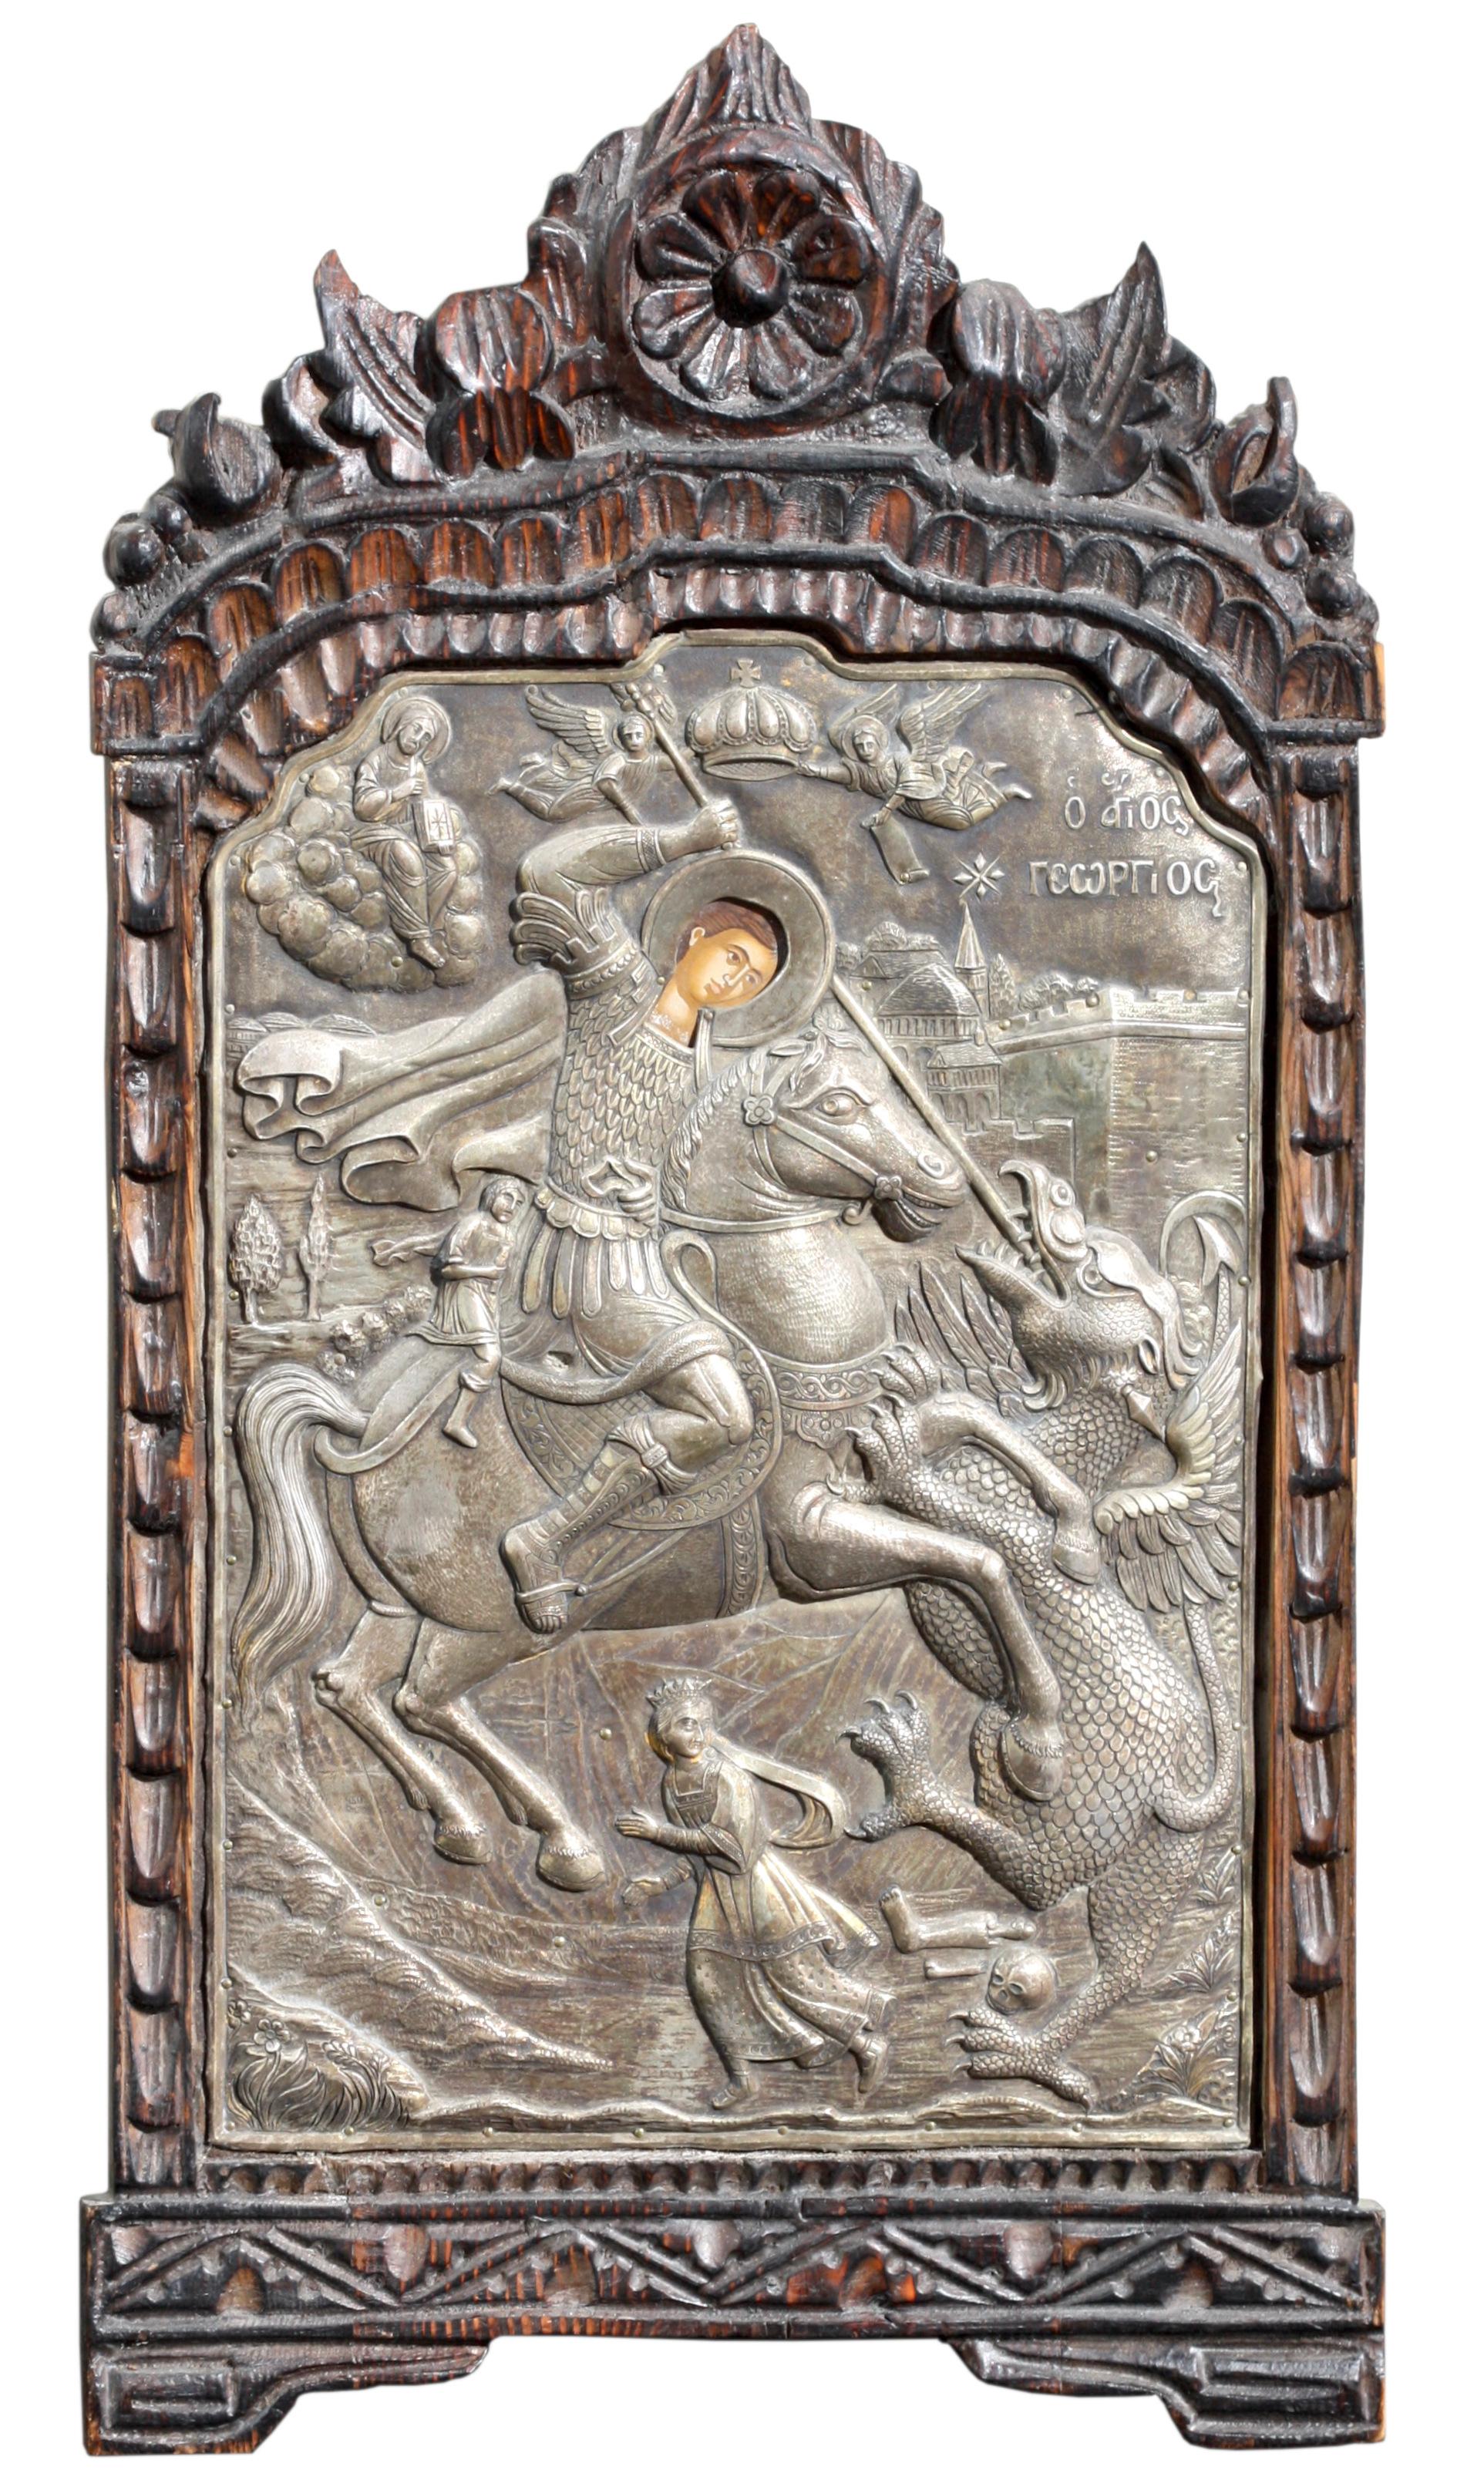 A Russian Silver Icon of St George, depicting the saint slaying the dragon, struck to the lower edge with maker's mark, 950 standard, within an elaborately carved frame.
Measuring 24.5 by 13 inches (62.23 x 33.02 cm.)